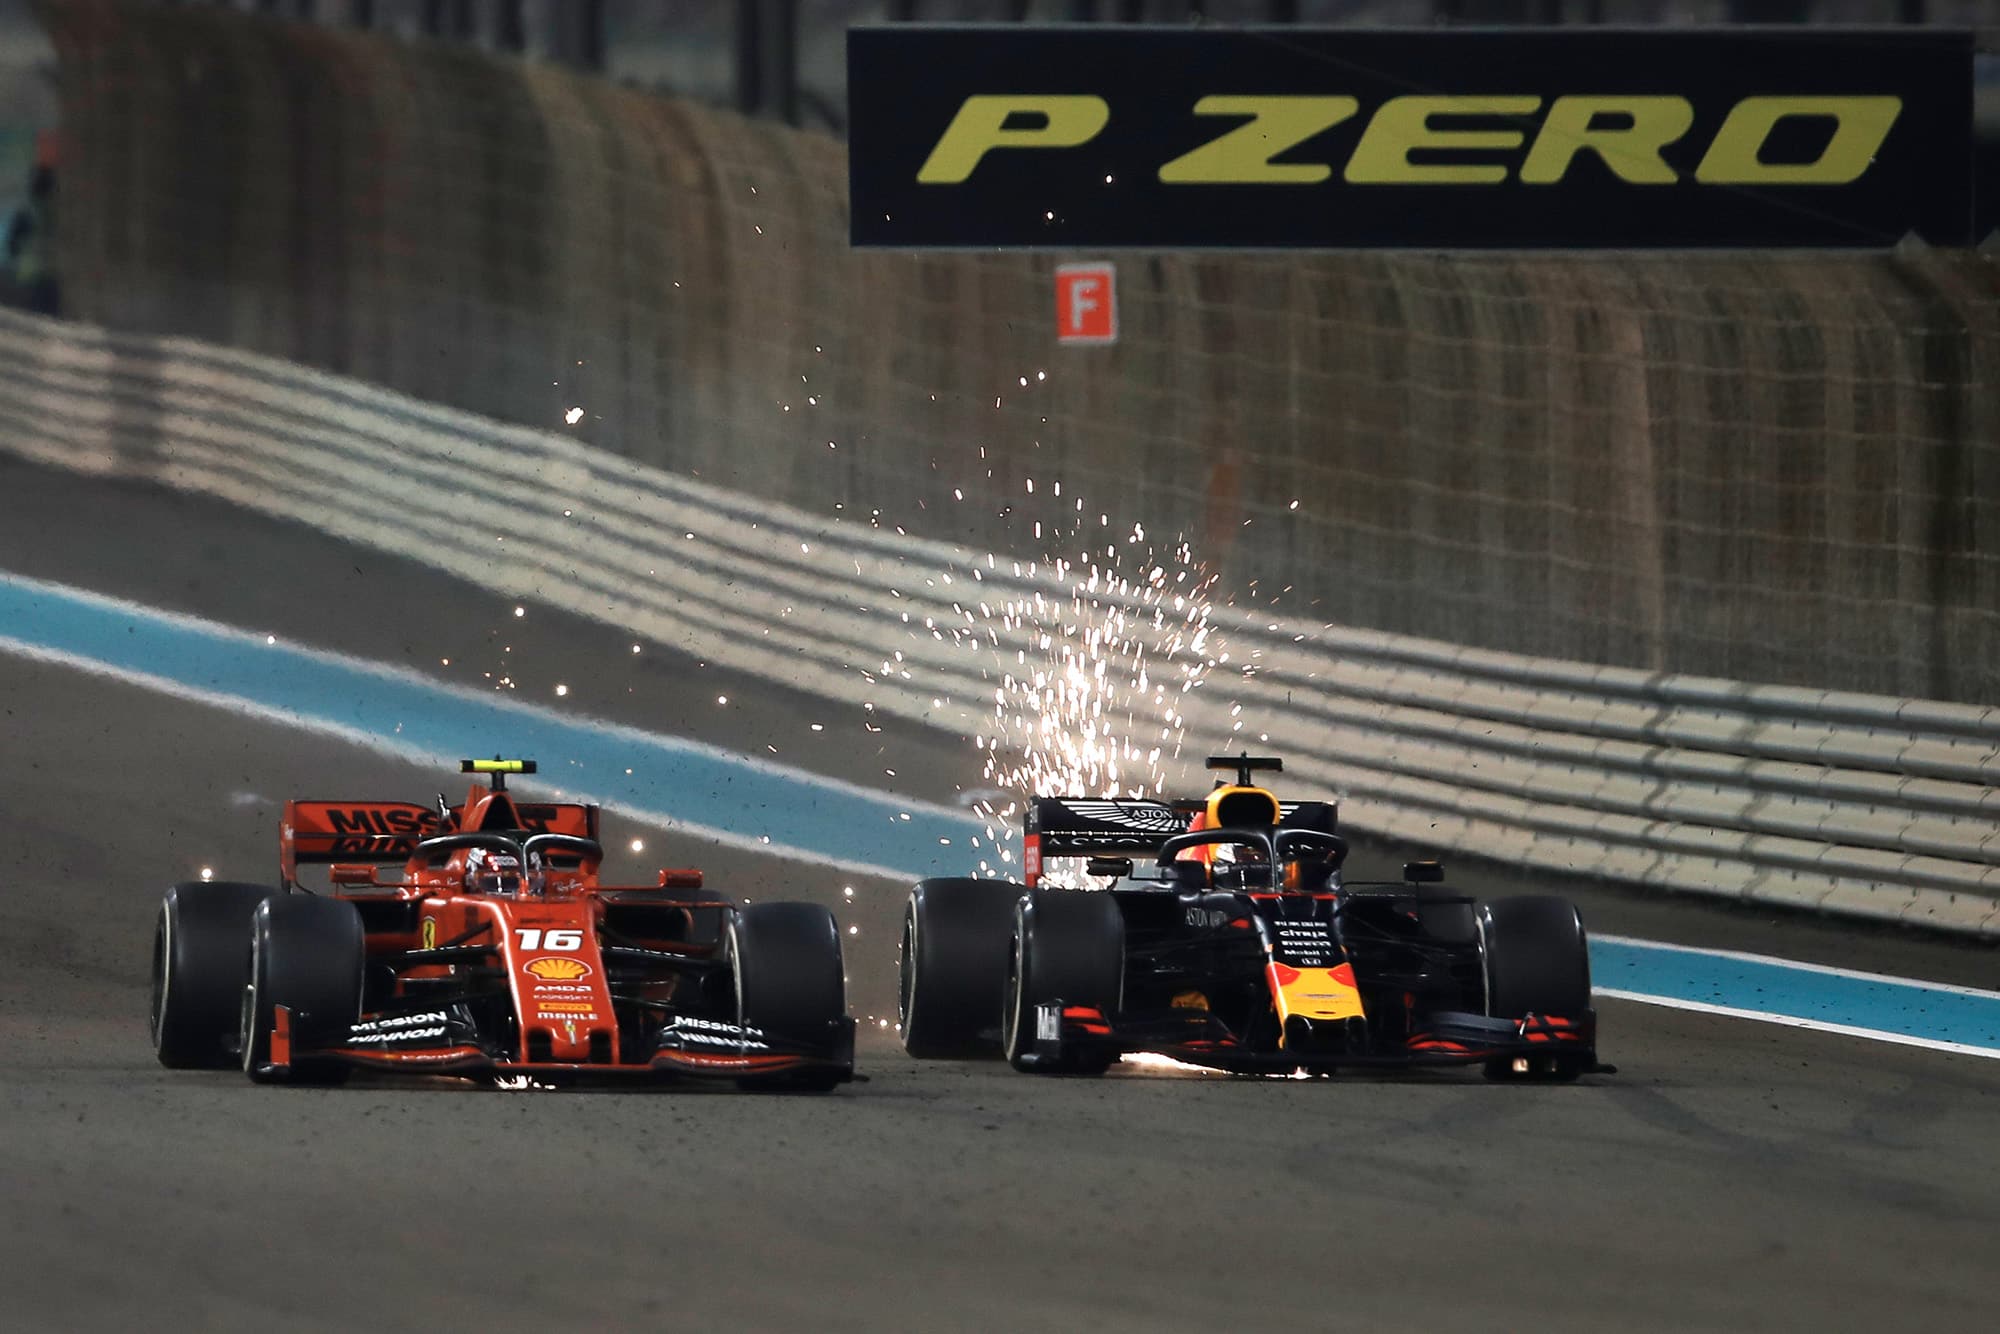 Max Verstappen overtakes Charles Leclerc at the 2019 F1 Abu Dhabi Grand Prix